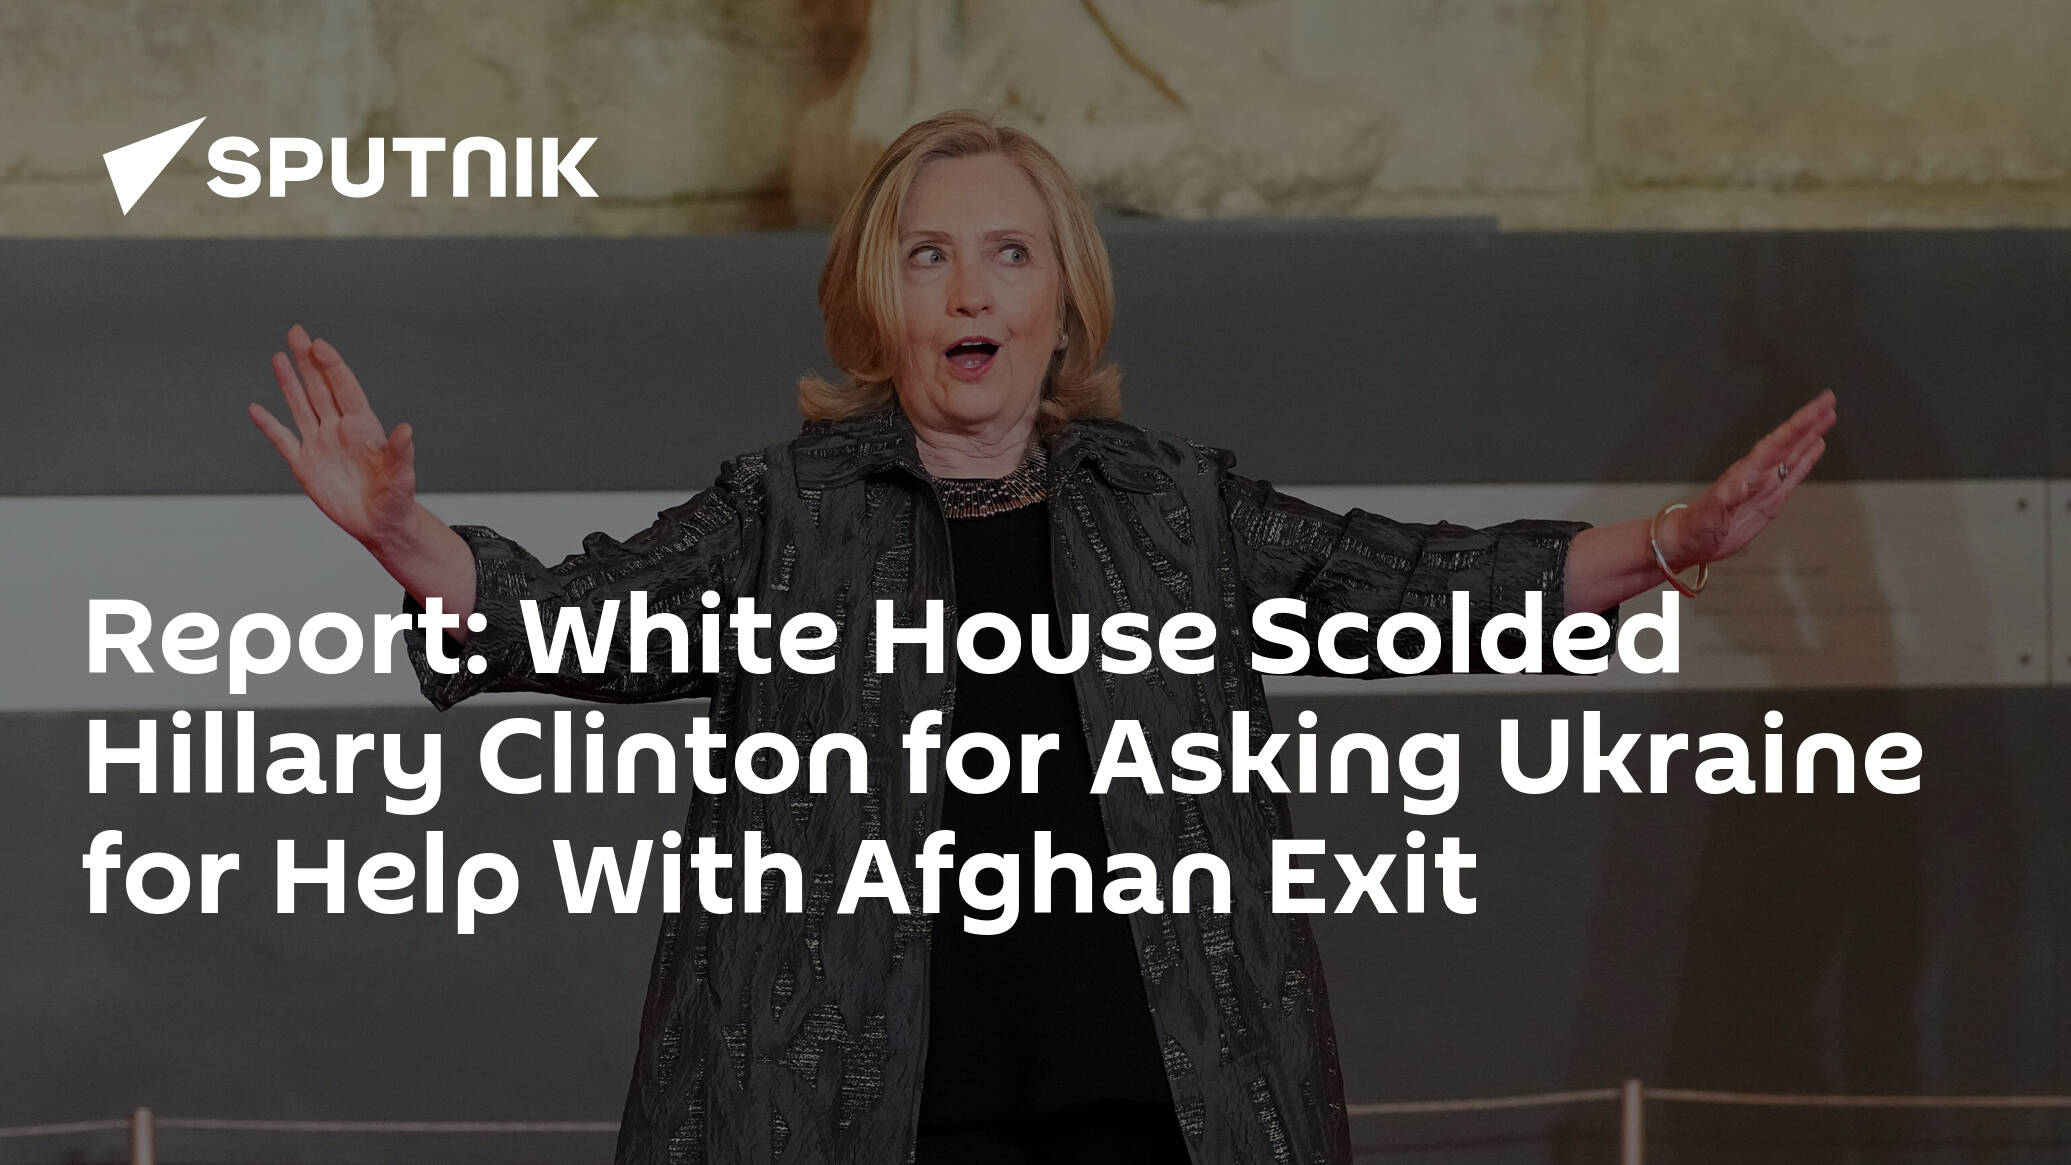 Report: White House Scolded Hillary Clinton for Asking Ukraine for Help With Afghan Exit